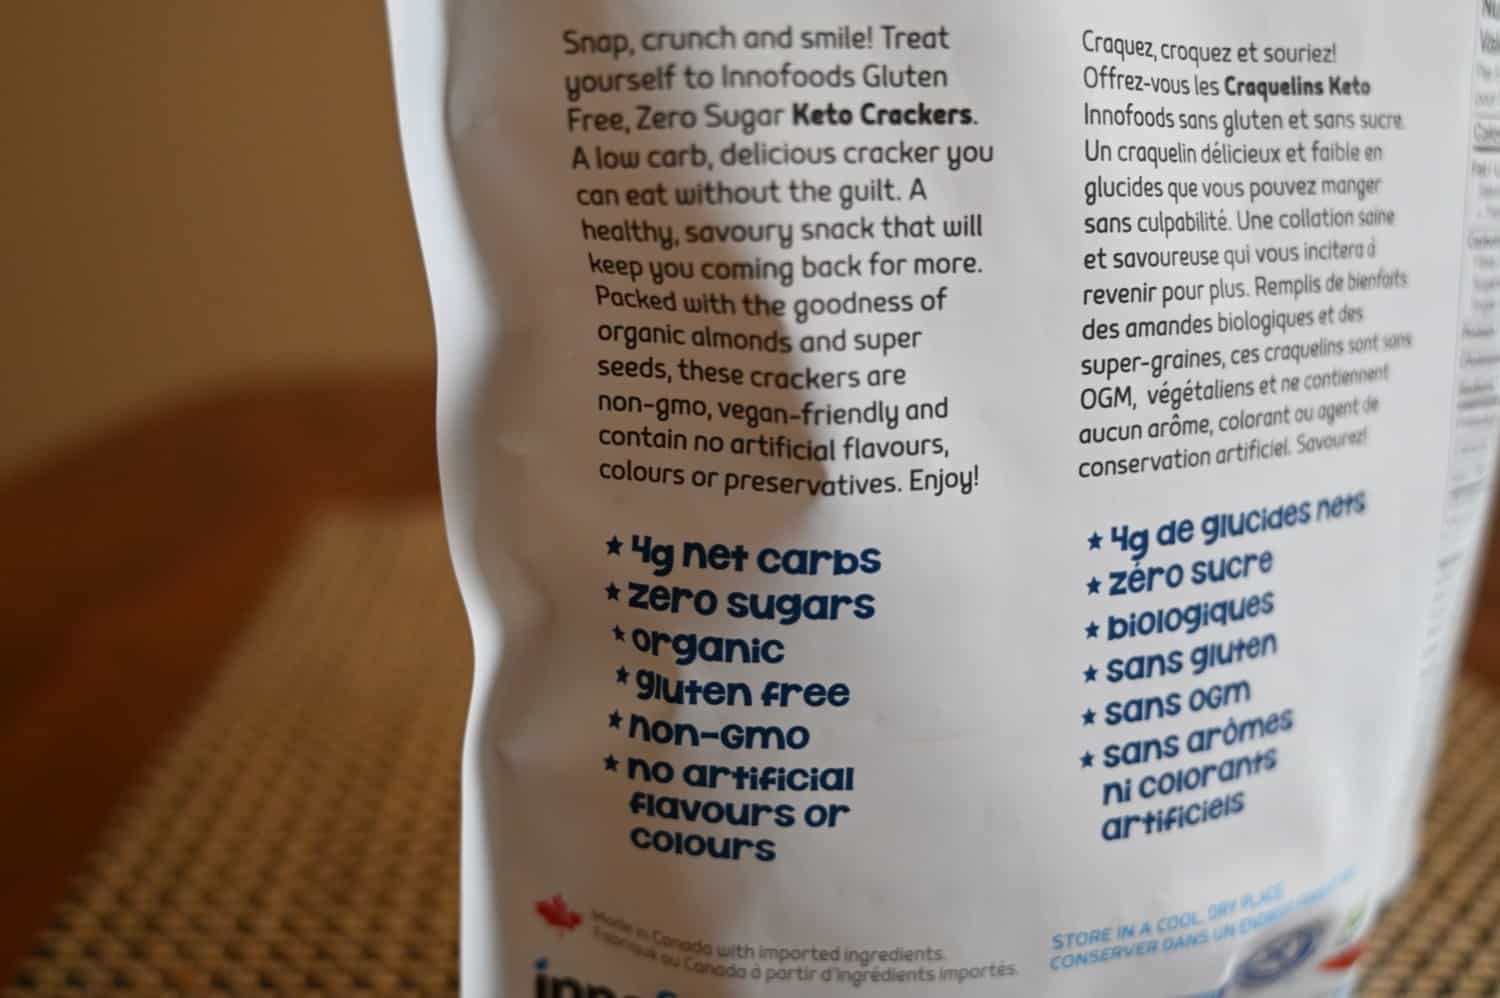 A close-up of the back of the bag with text discussing some of the features of the crackers, including key nutritional highlights.